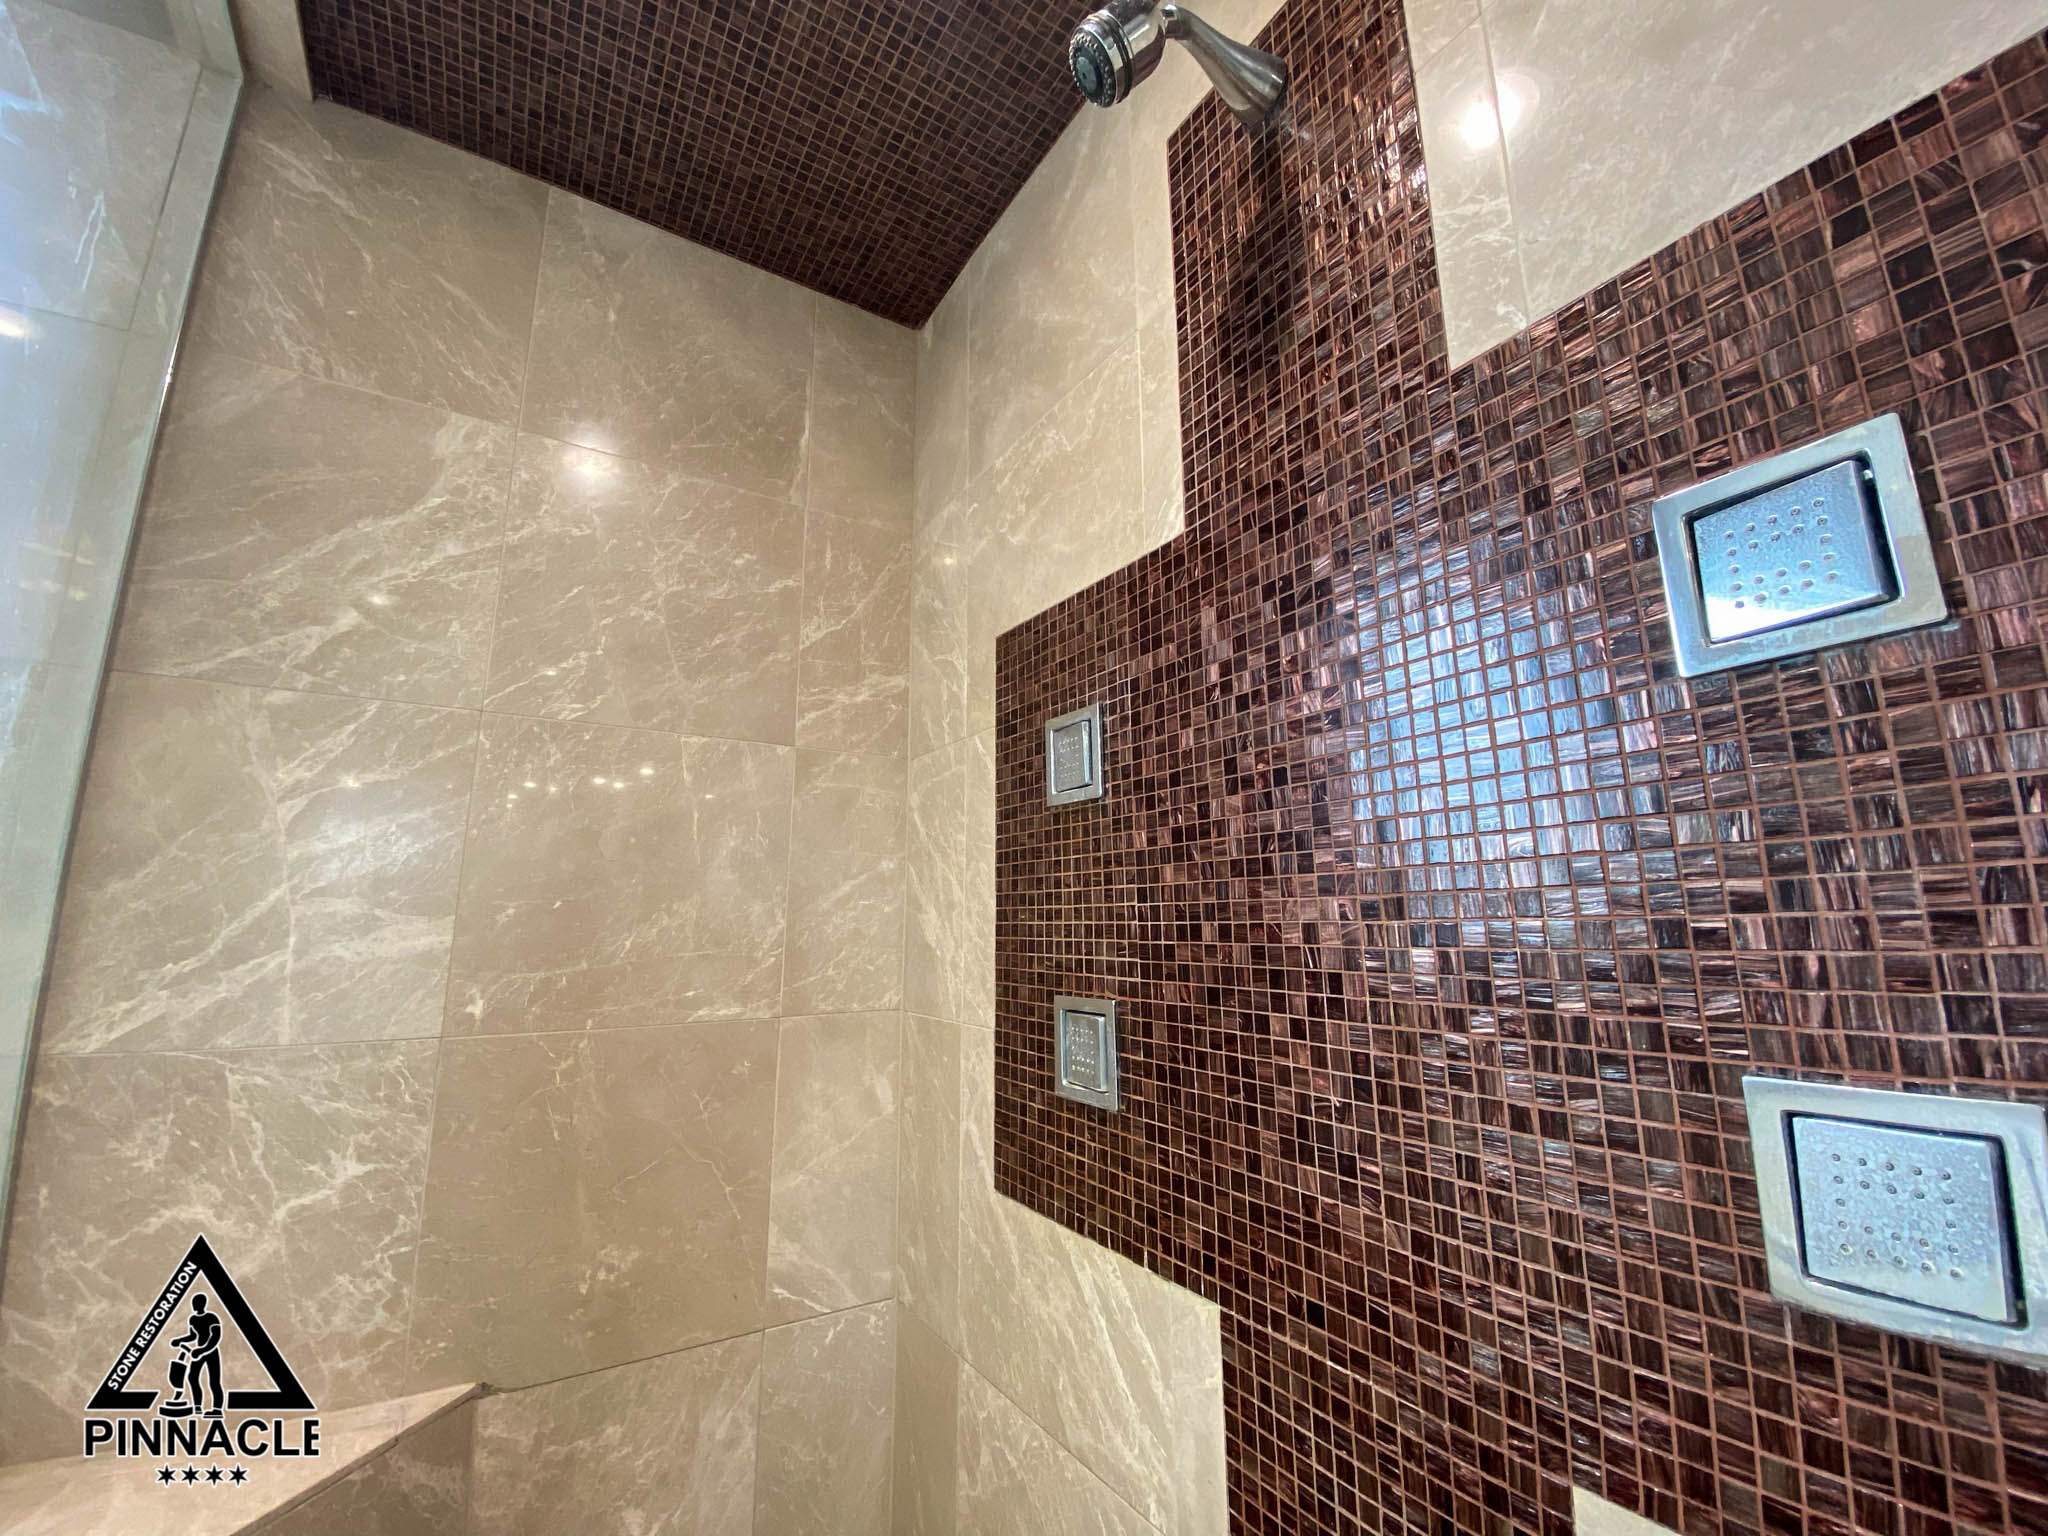 Crema Marfil Marble Shower Restoration – deep cleaning, buffing, sealing, grout cleaning